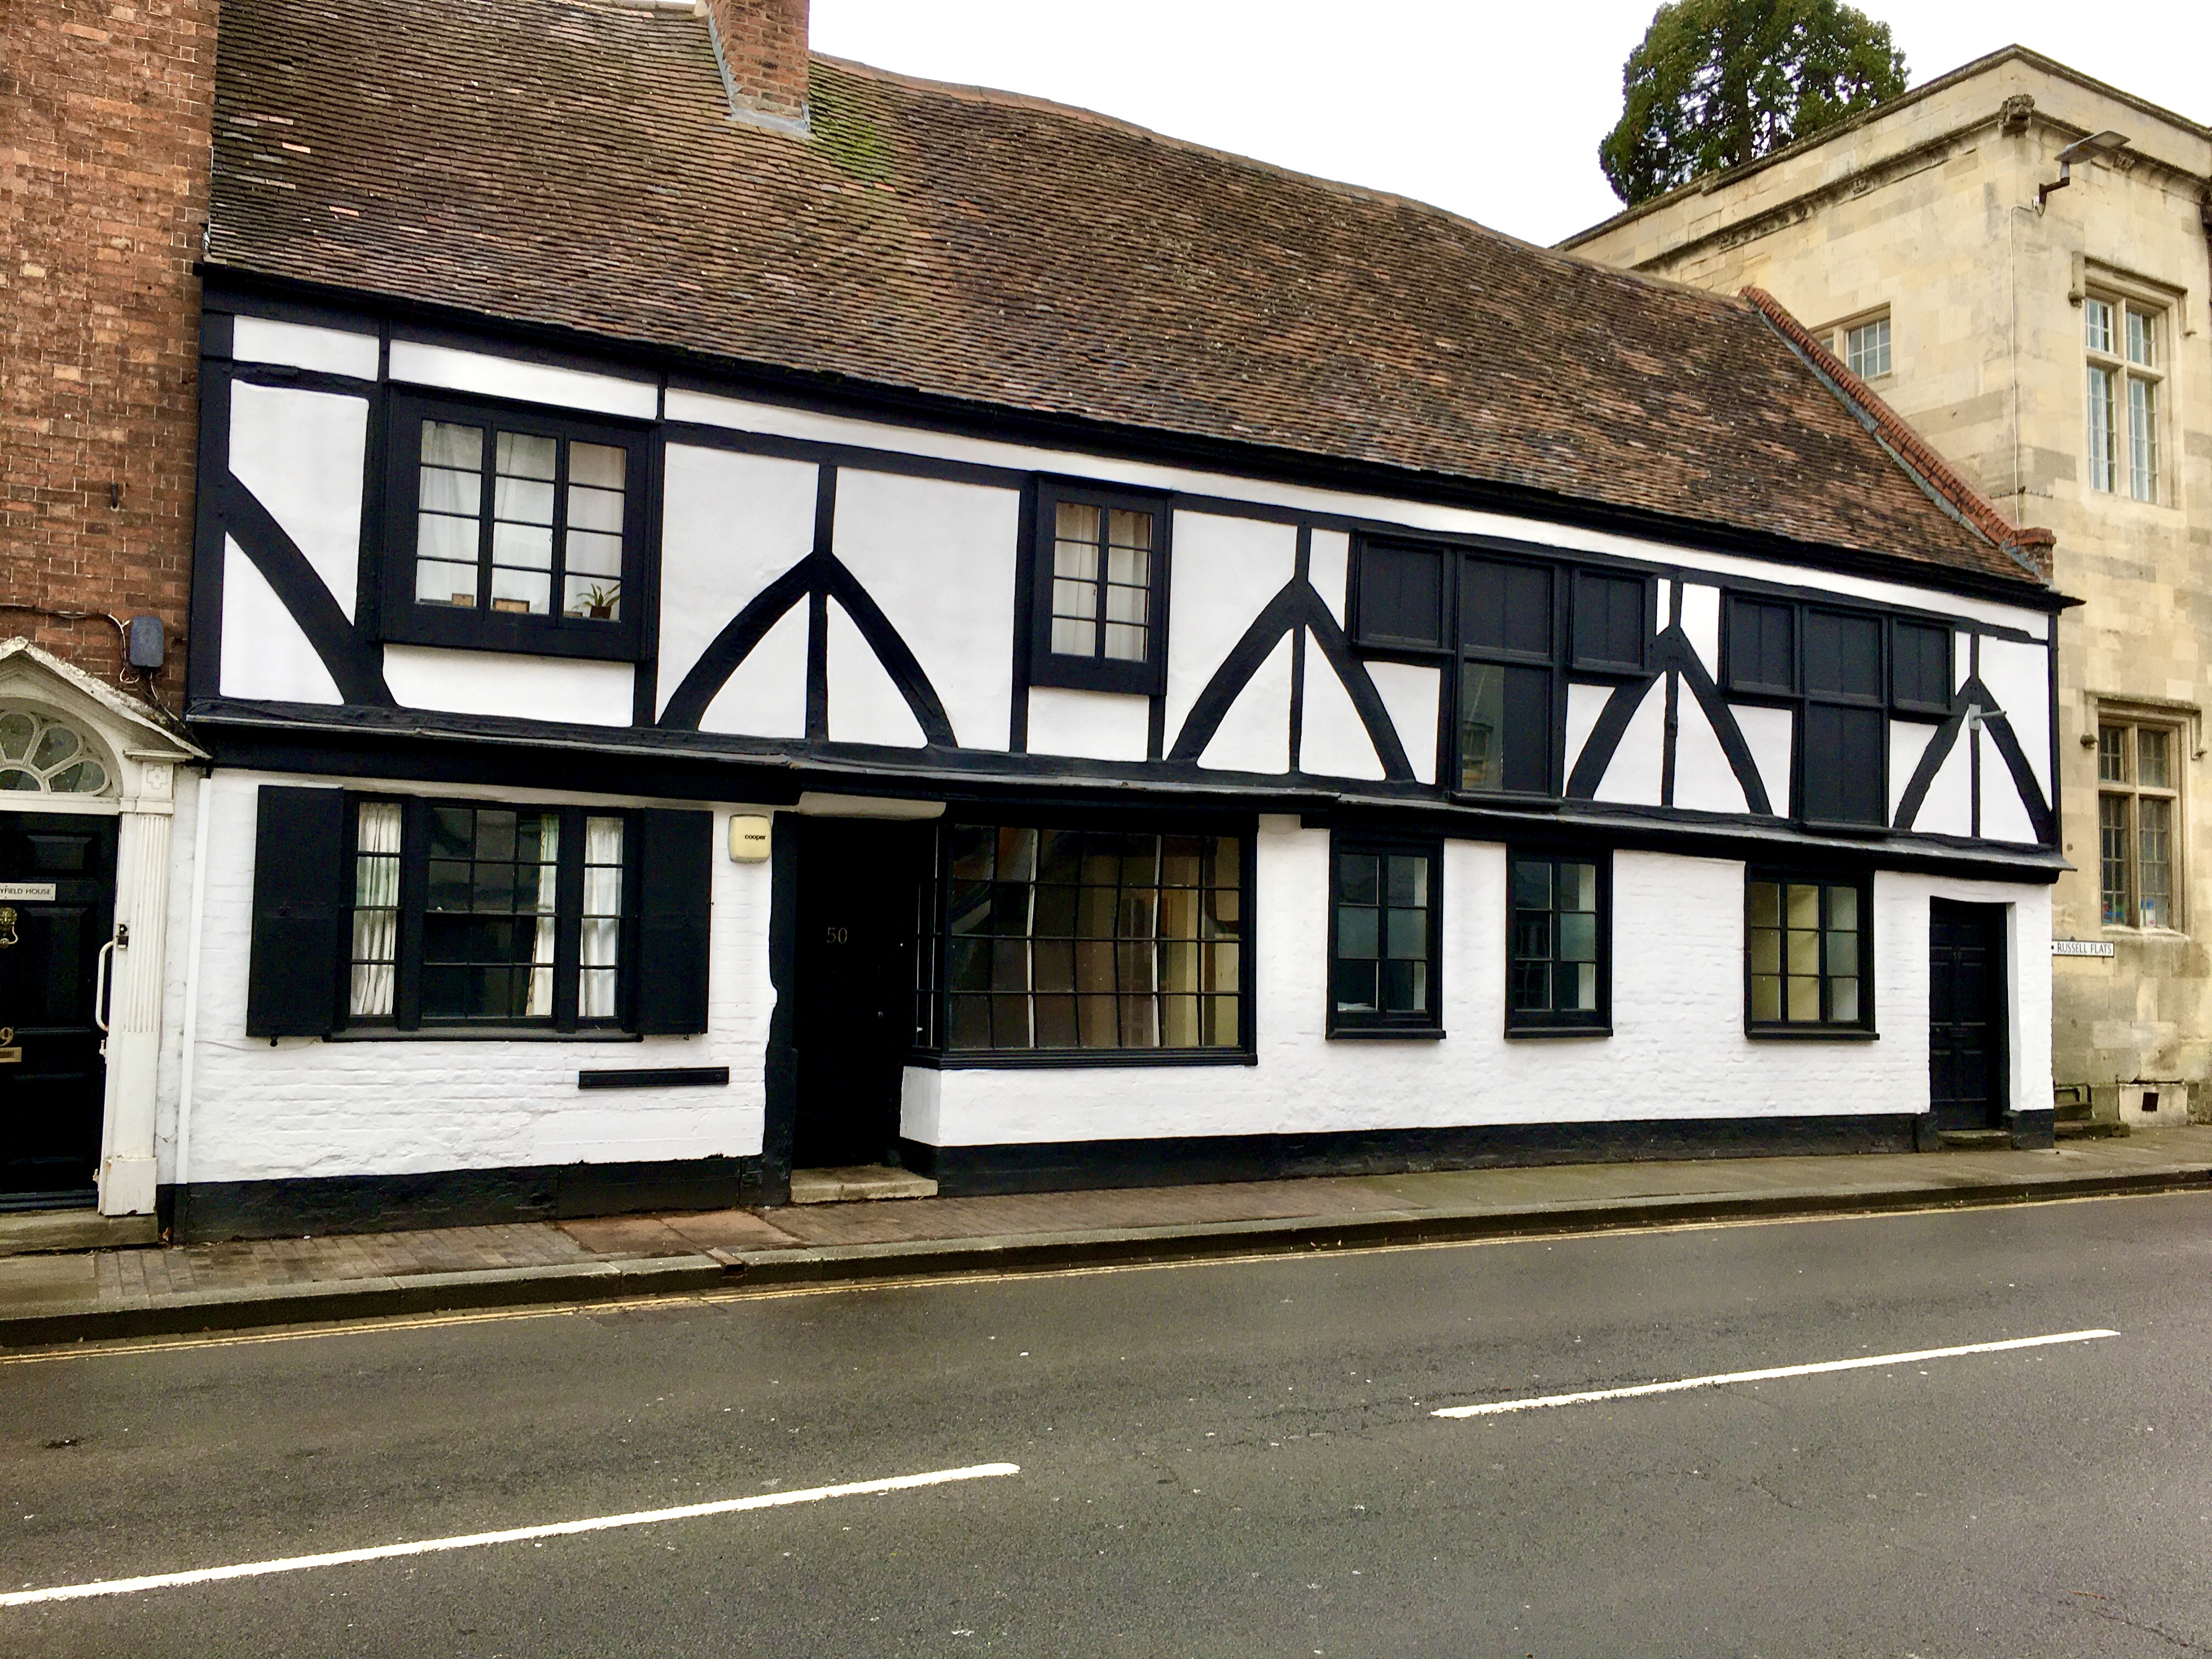 Ghosts and Hauntings of Tewkesbury- The Grey Man Haunting